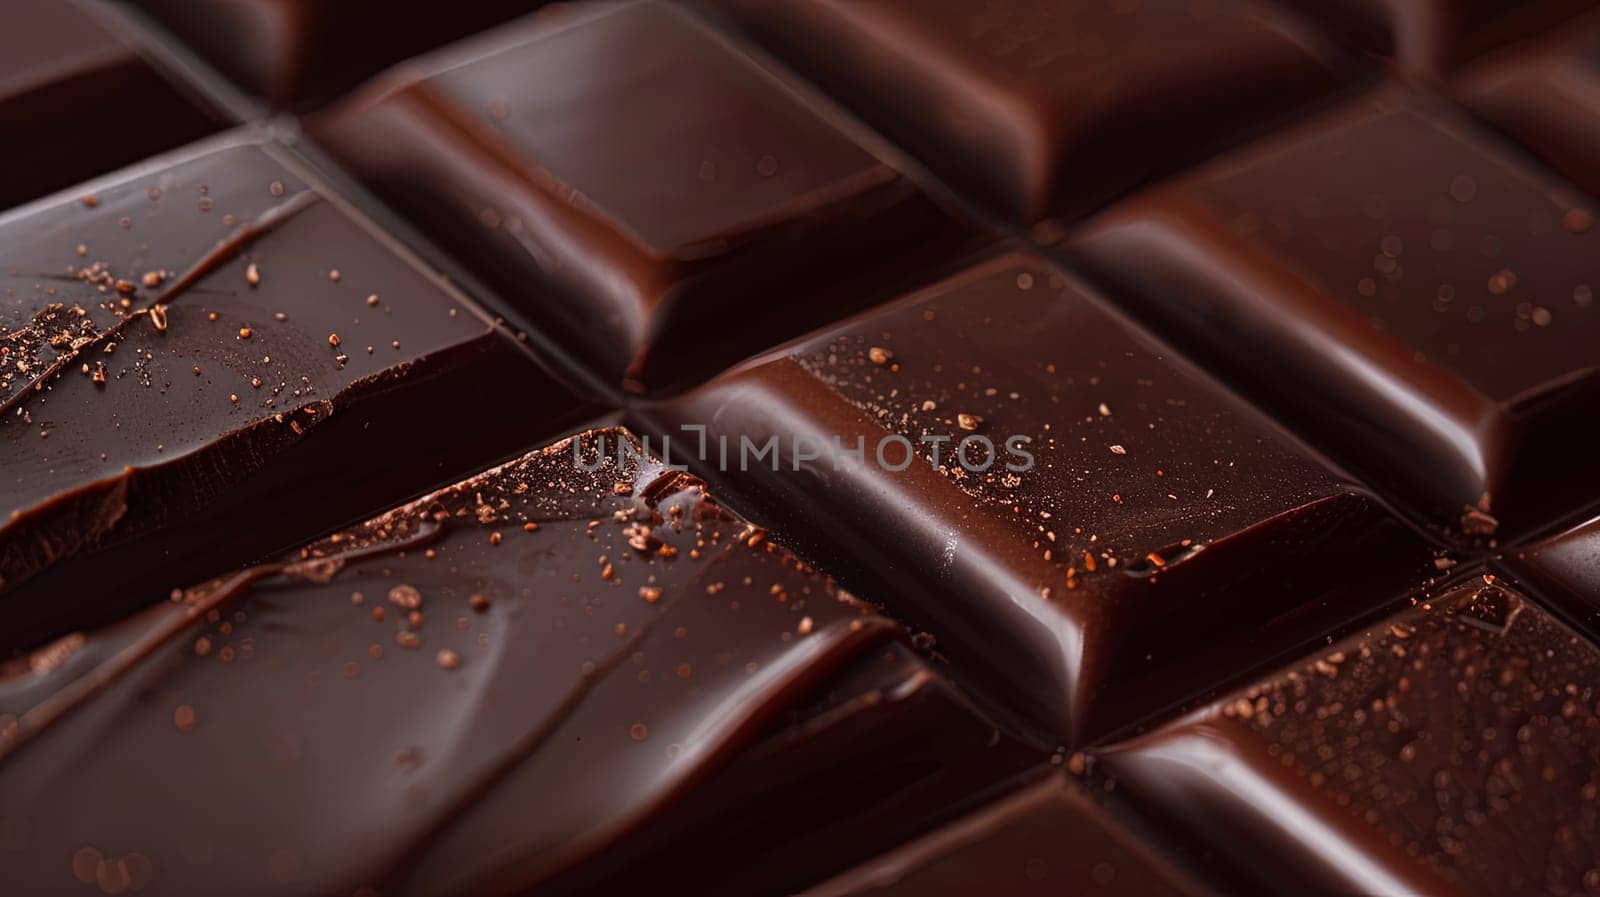 Detailed close-up of a smooth dark chocolate bar with visible break lines and an even surface.